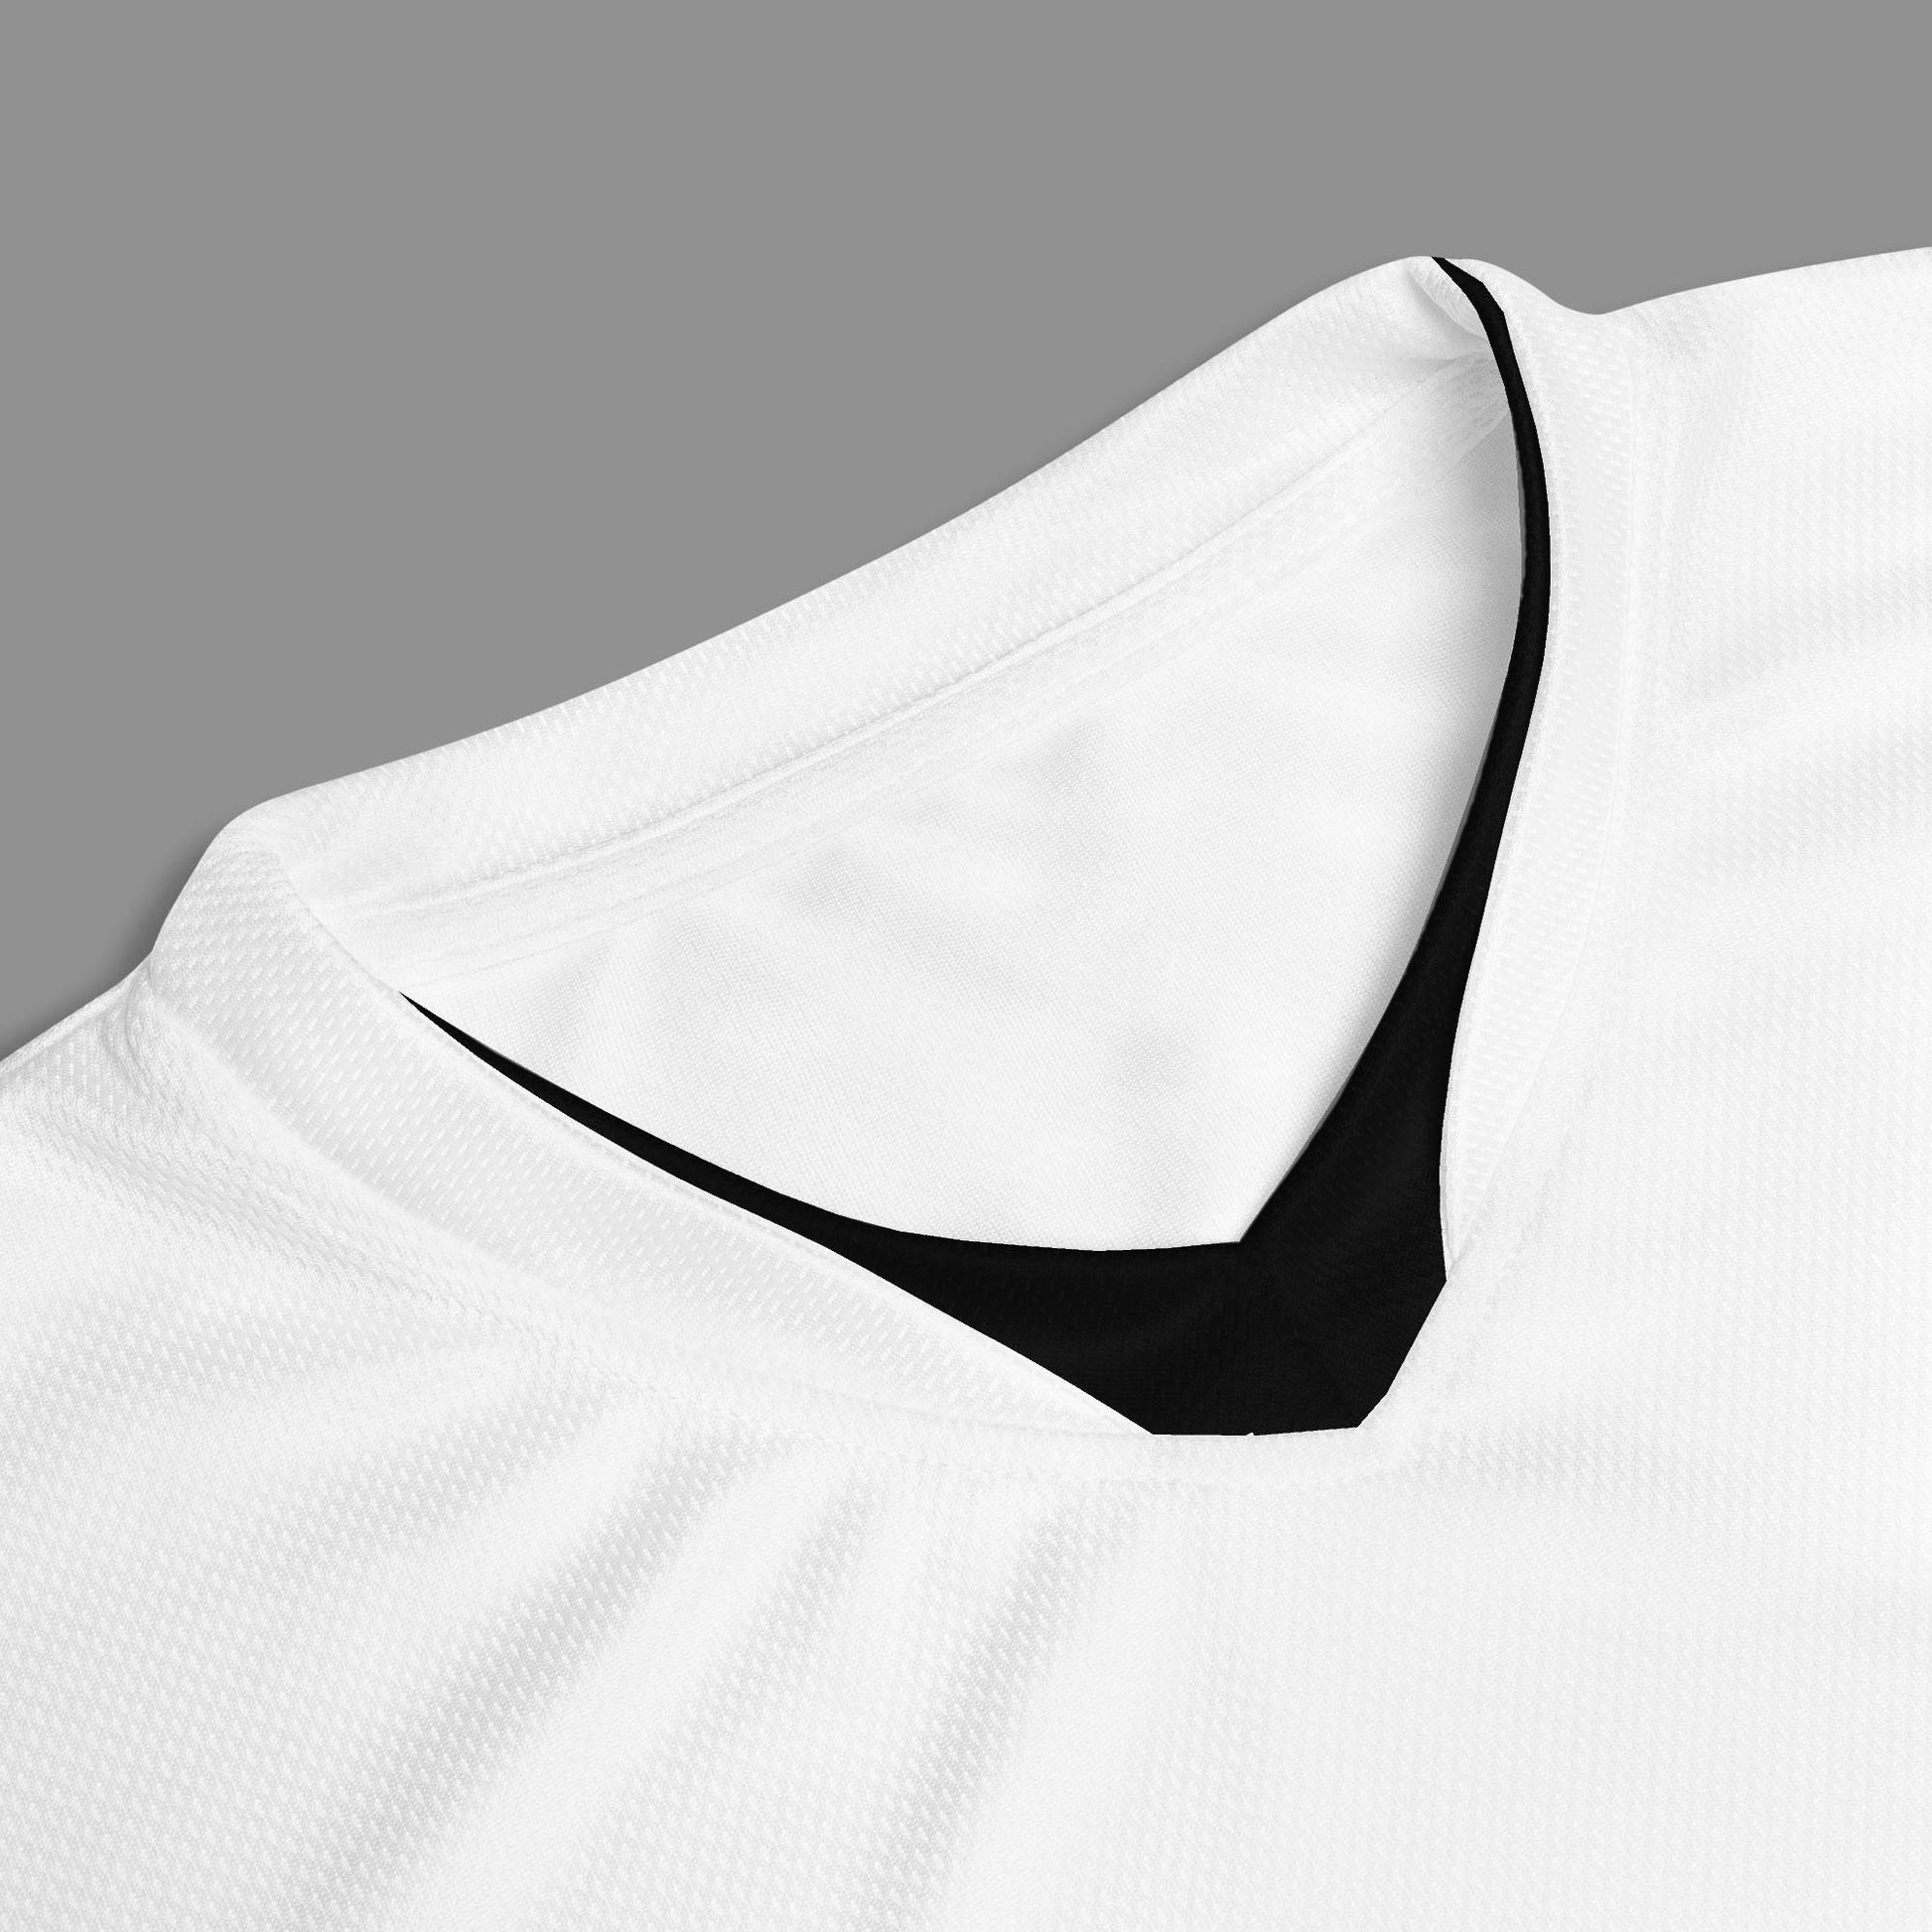 Detail of a white sports jersey with "Design is thinking made tangible" printed on the jersey. 